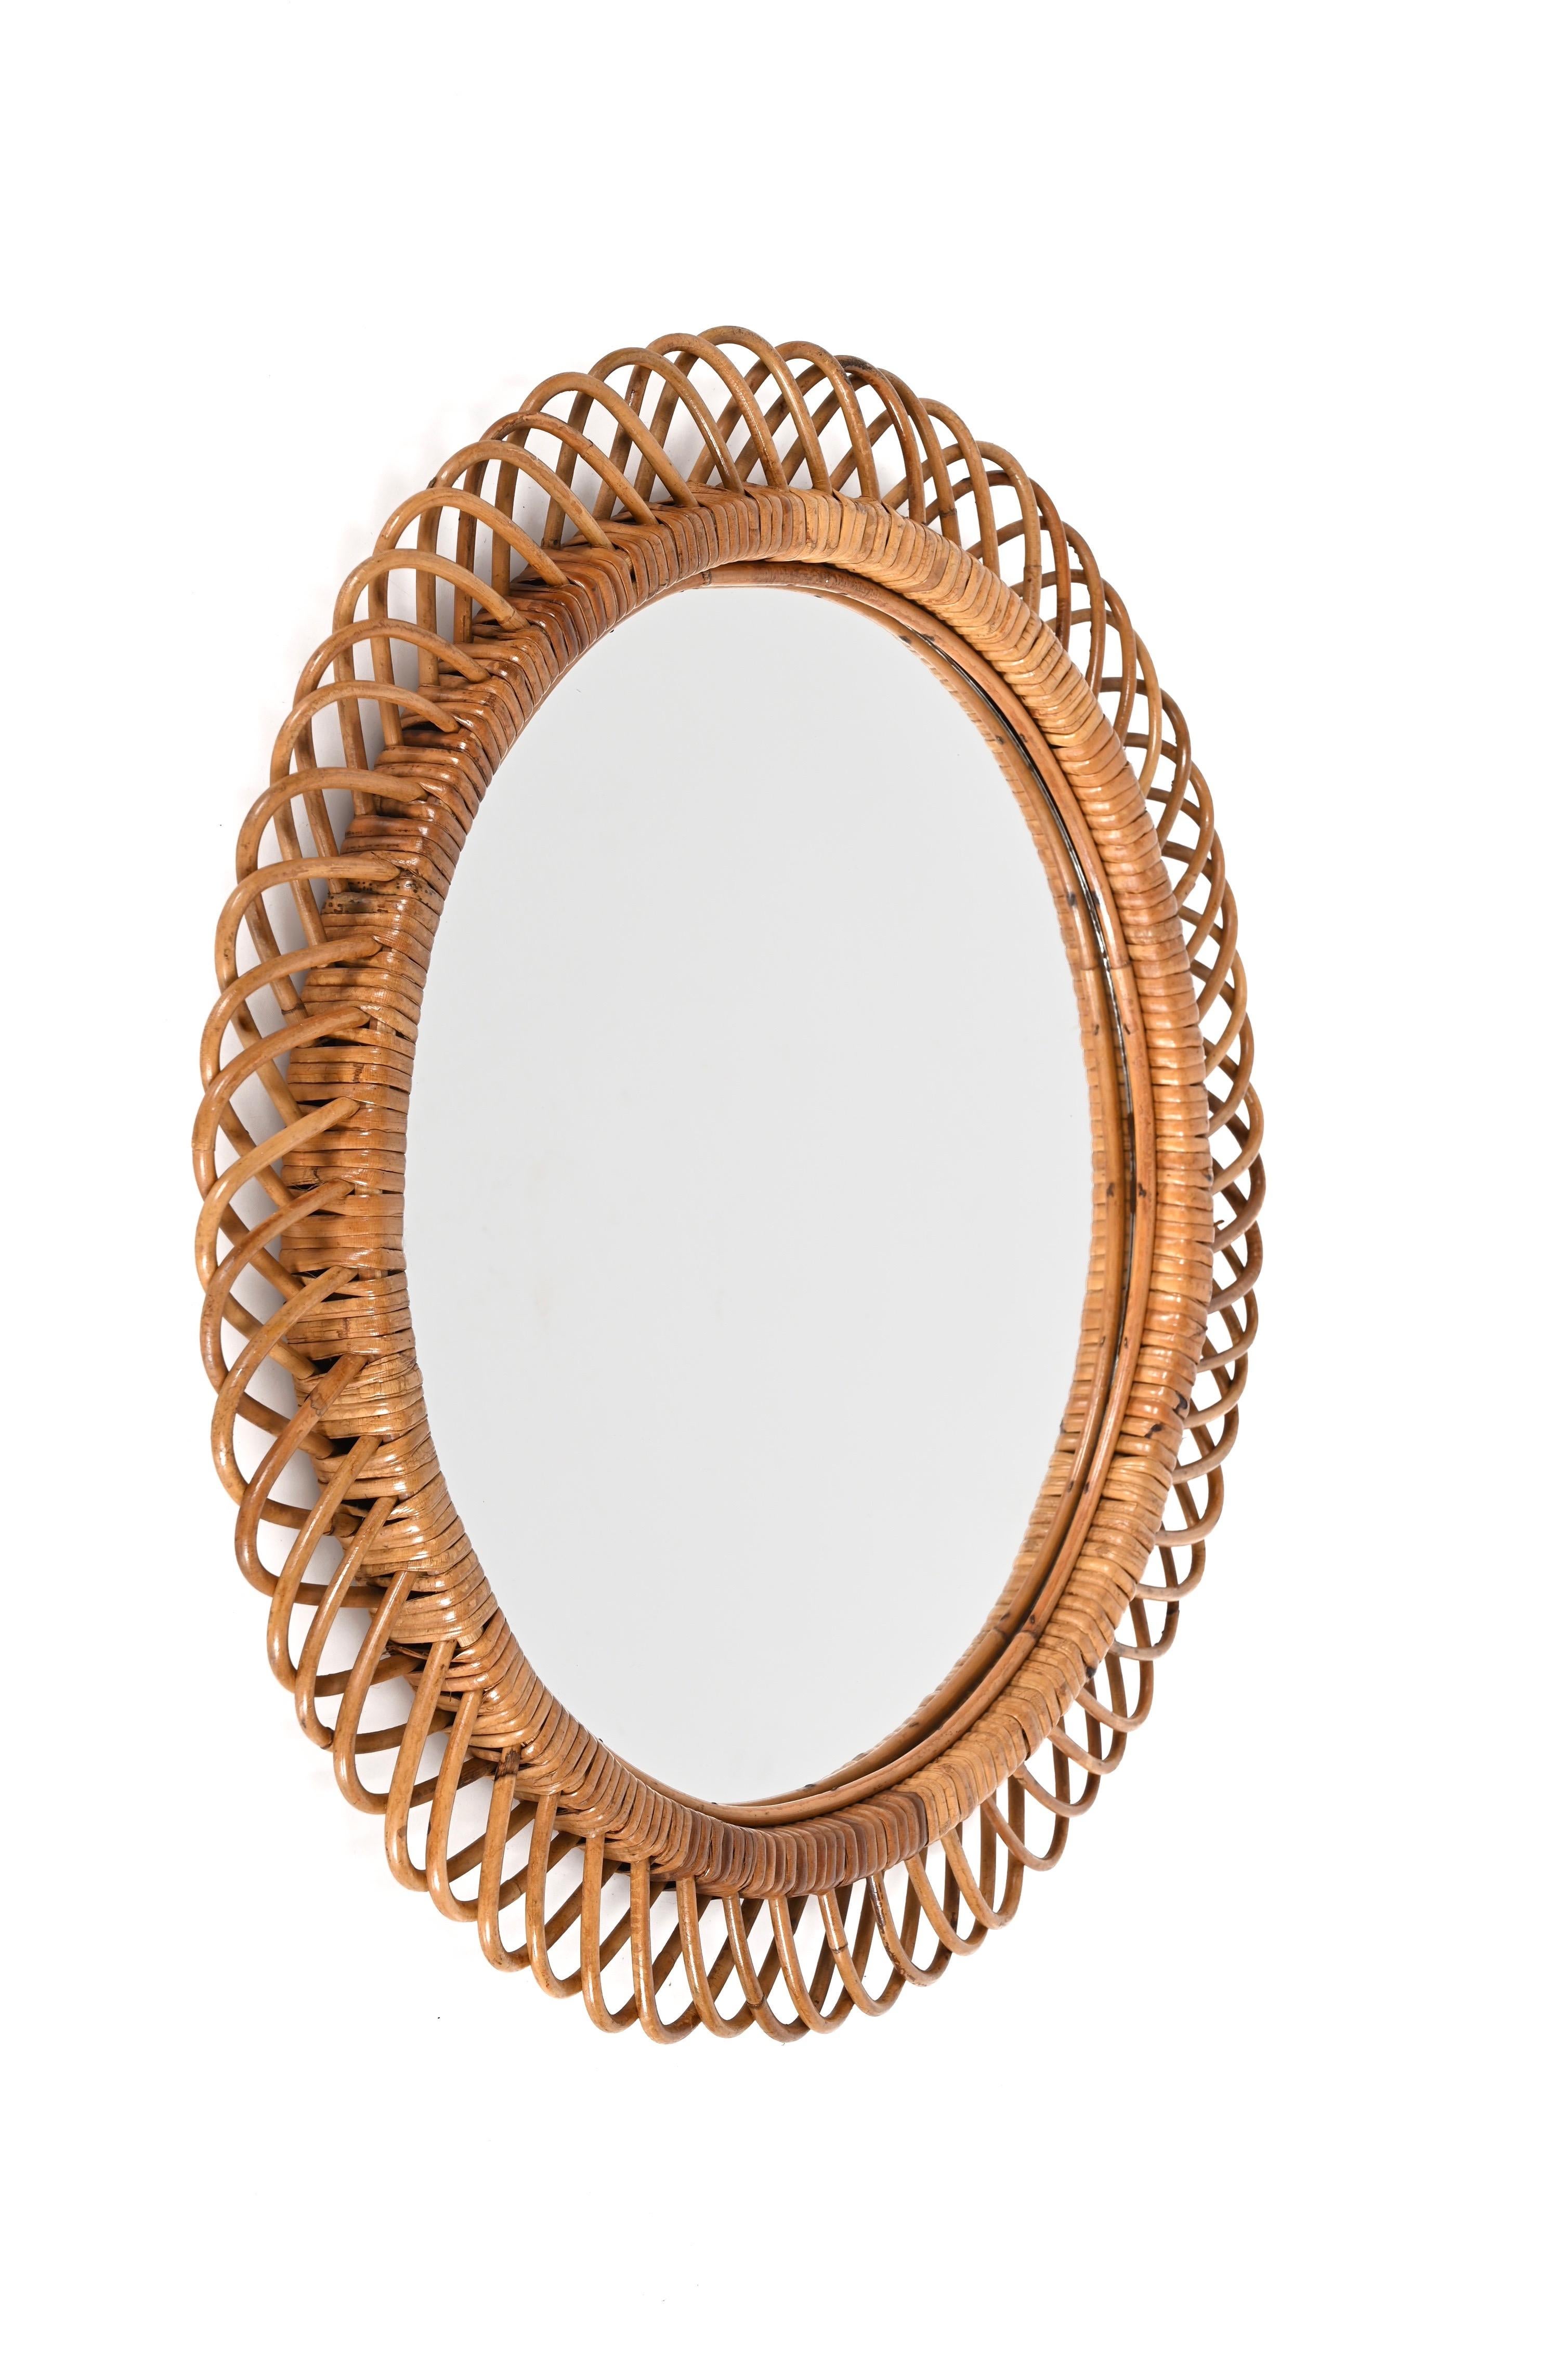 Gorgeous midcentury French Riviera rattan and bamboo round mirror. This stunning piece is attributed to Franco Albini as designer and Bonacina and was produced in Italy during the 1960s.

This decorative round mirror is unique as it has a curved